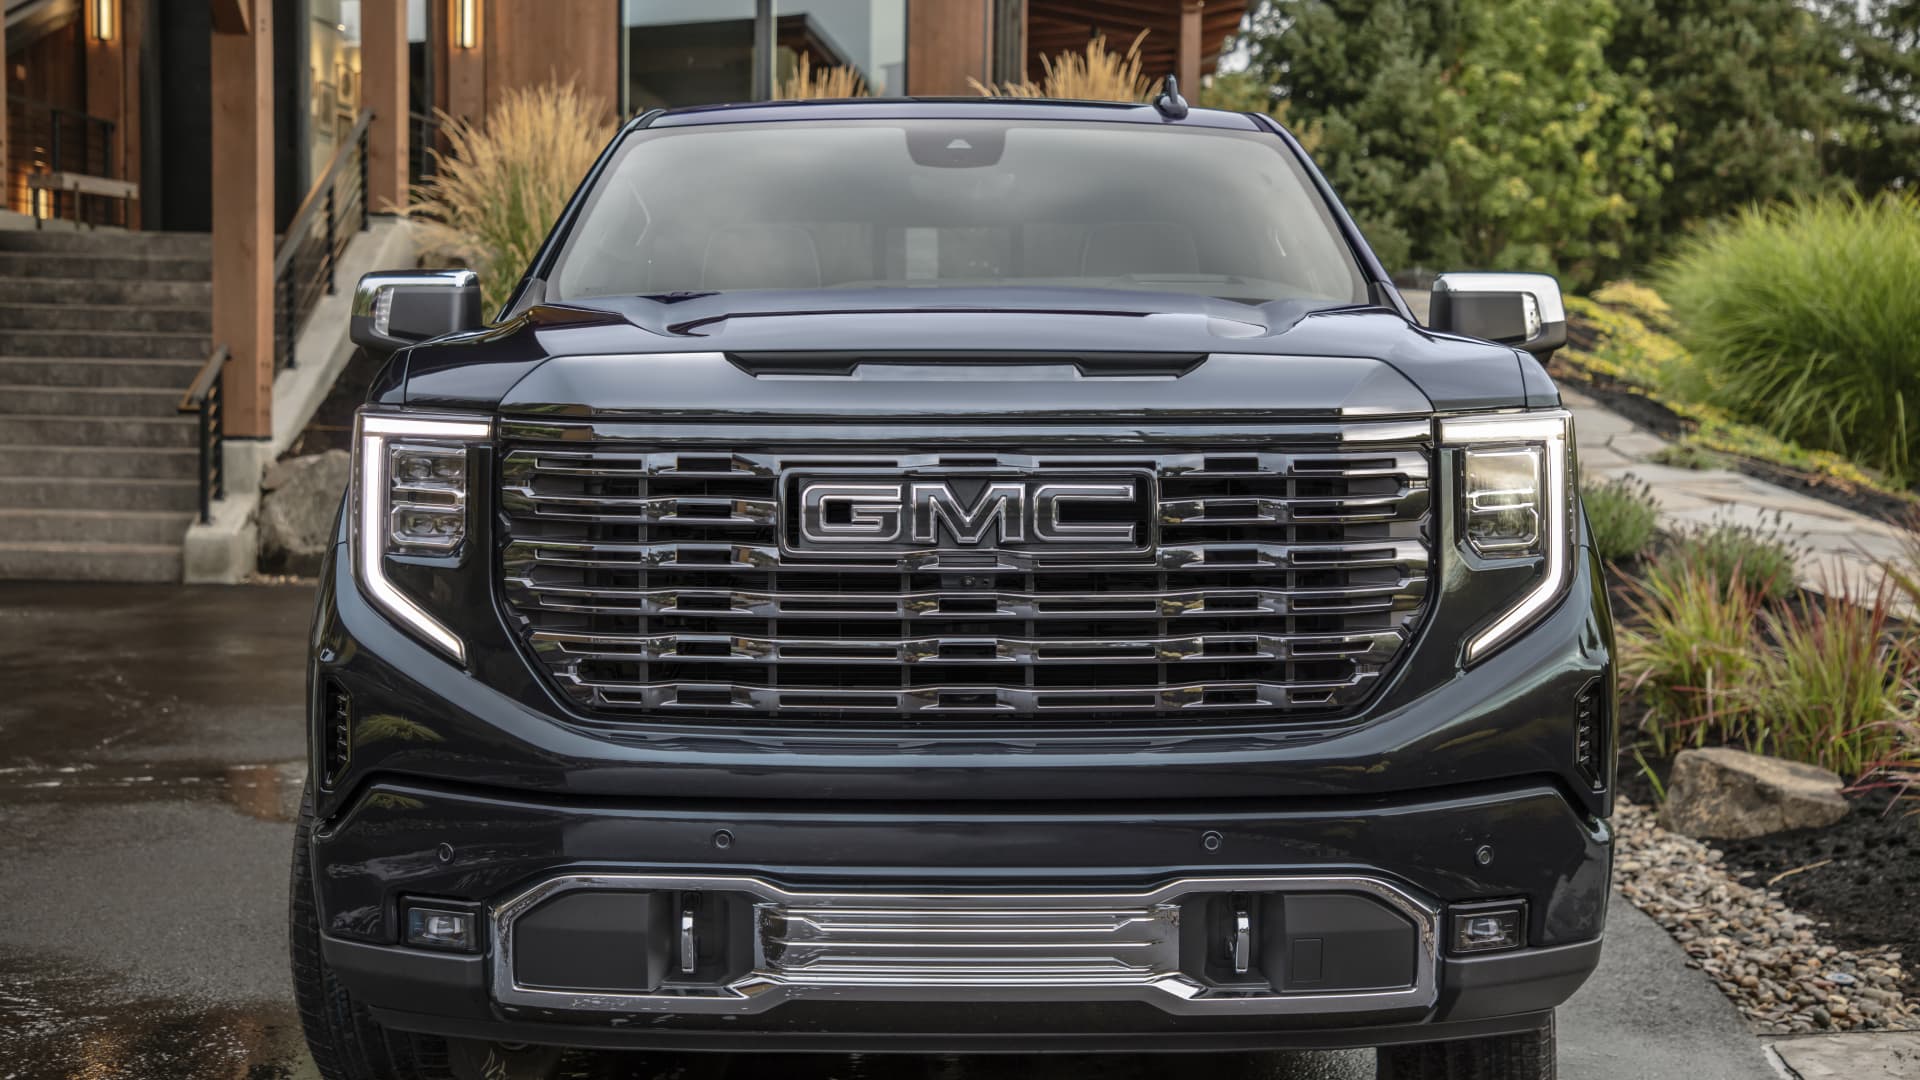 GM reclaims title as America’s top automaker after a 2.5% jump in sales last year